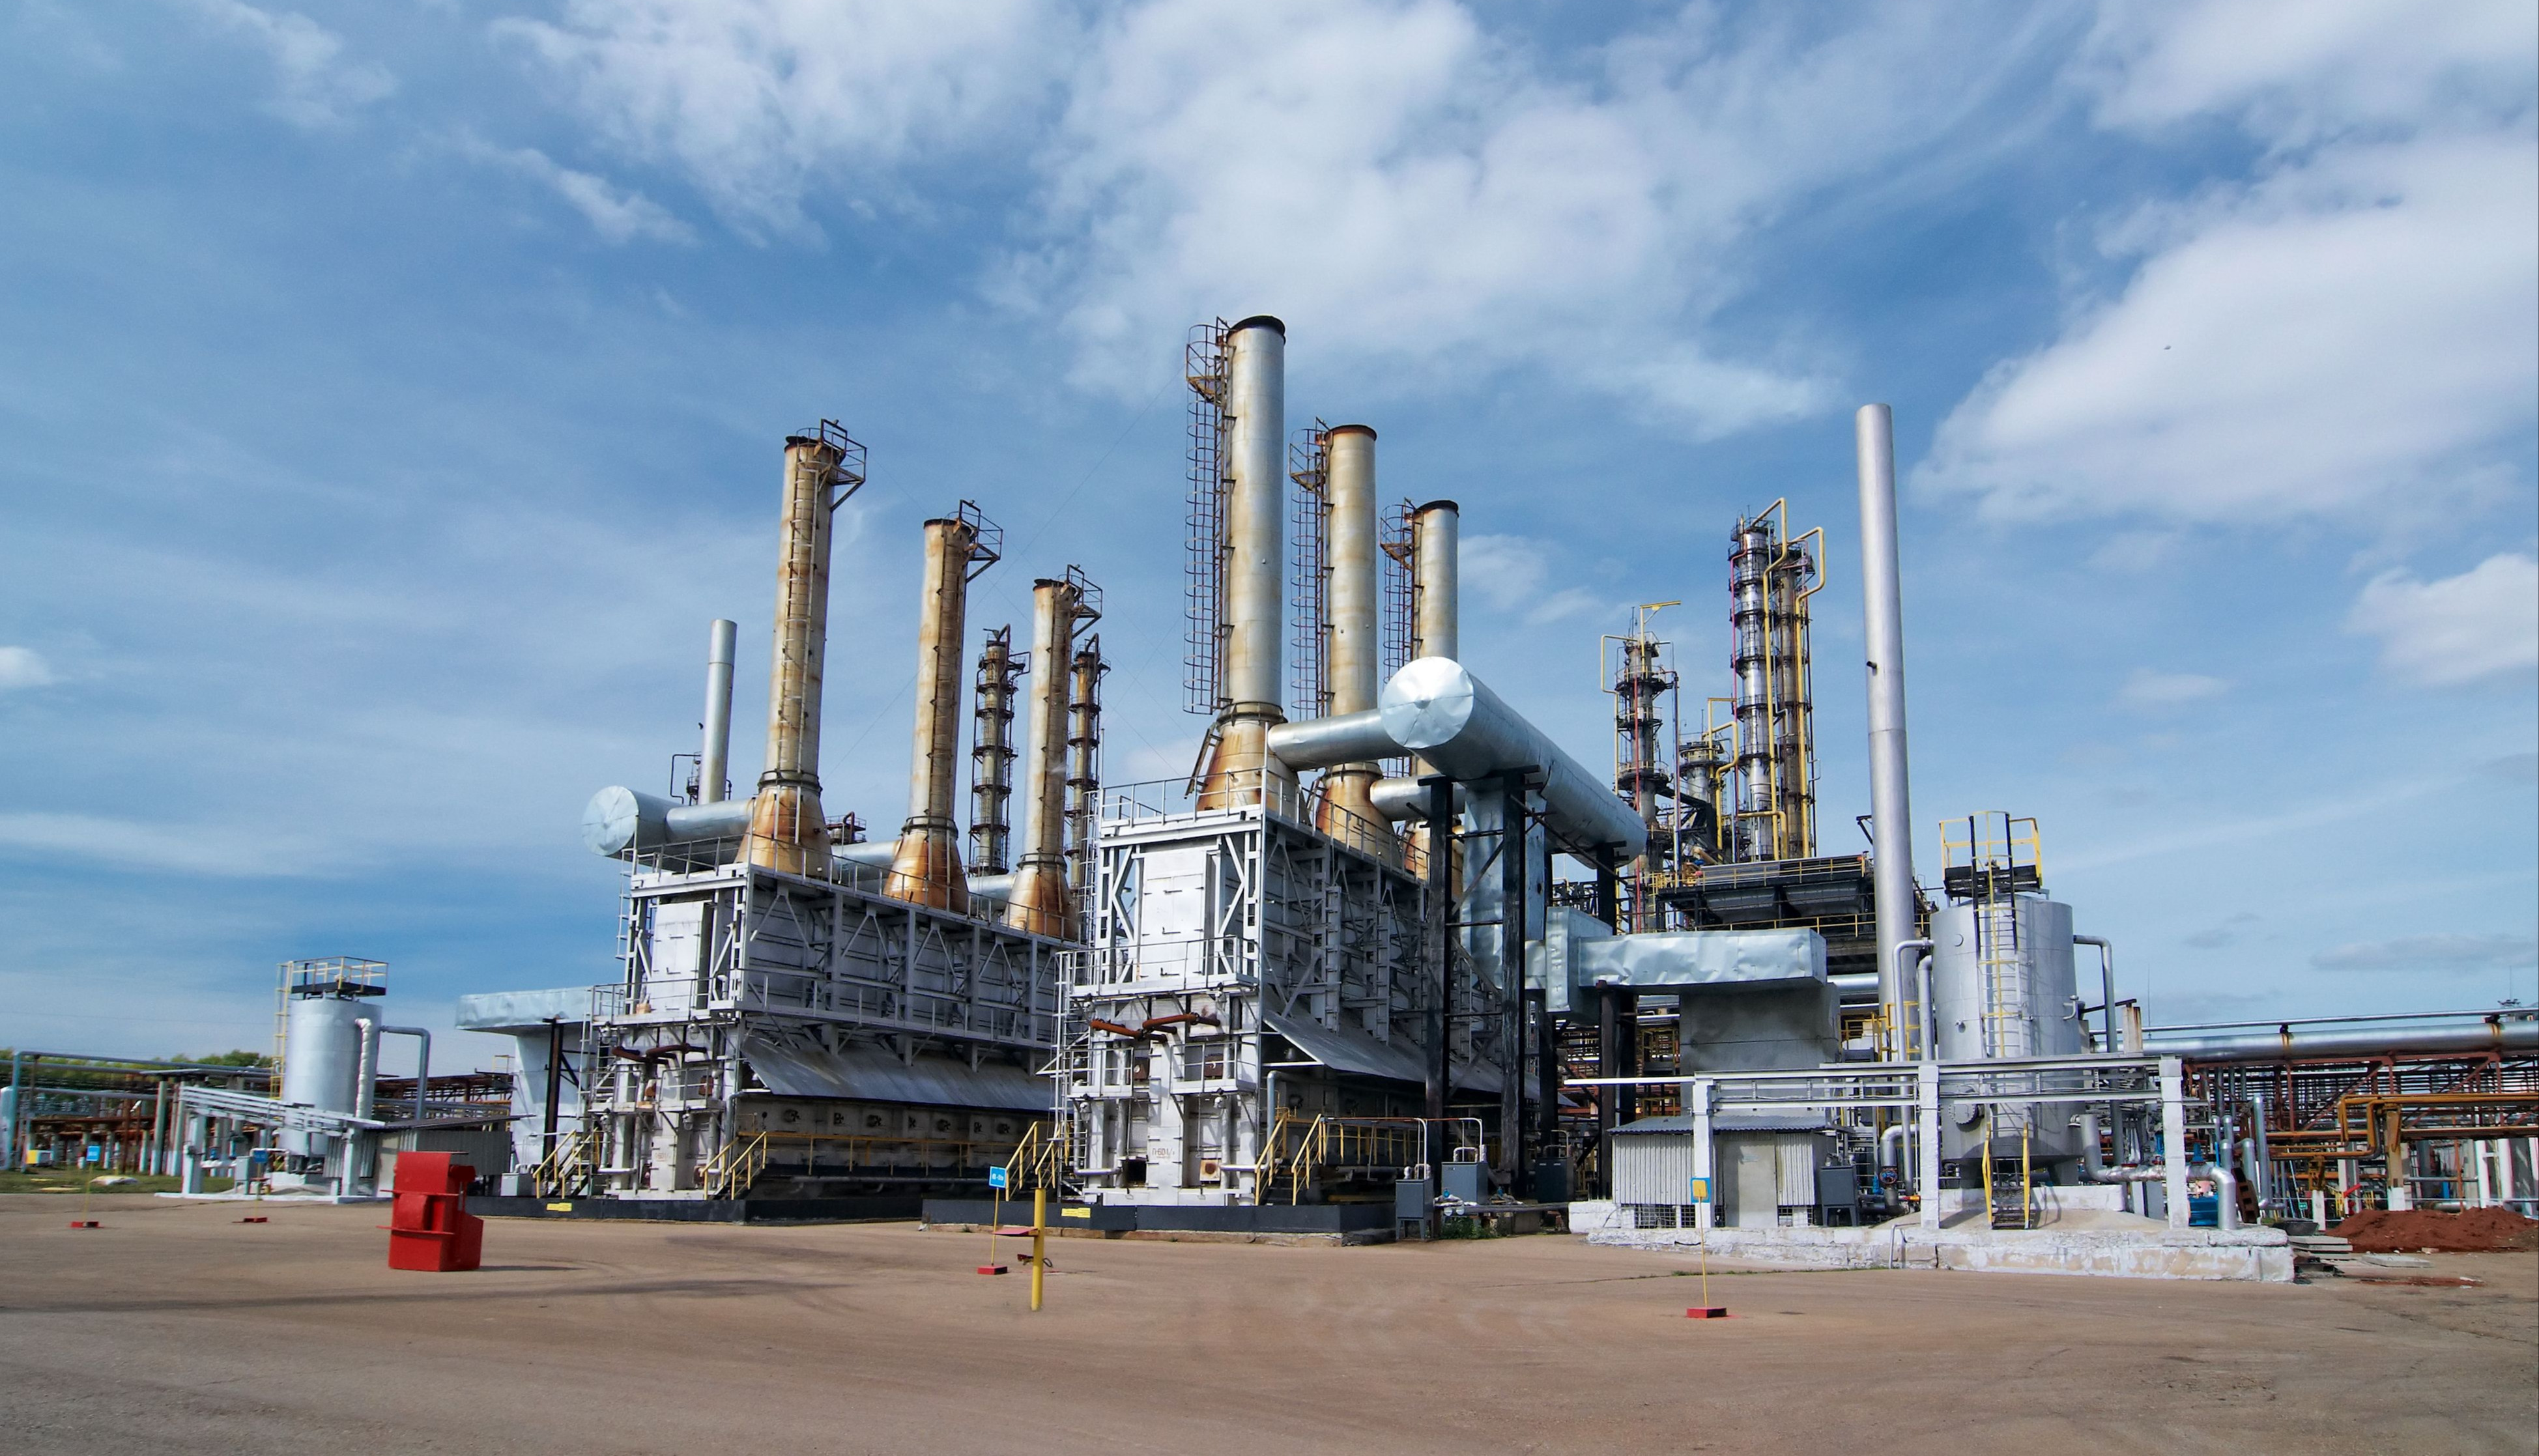 Image shows a petrochemical plant and a clear blue sky